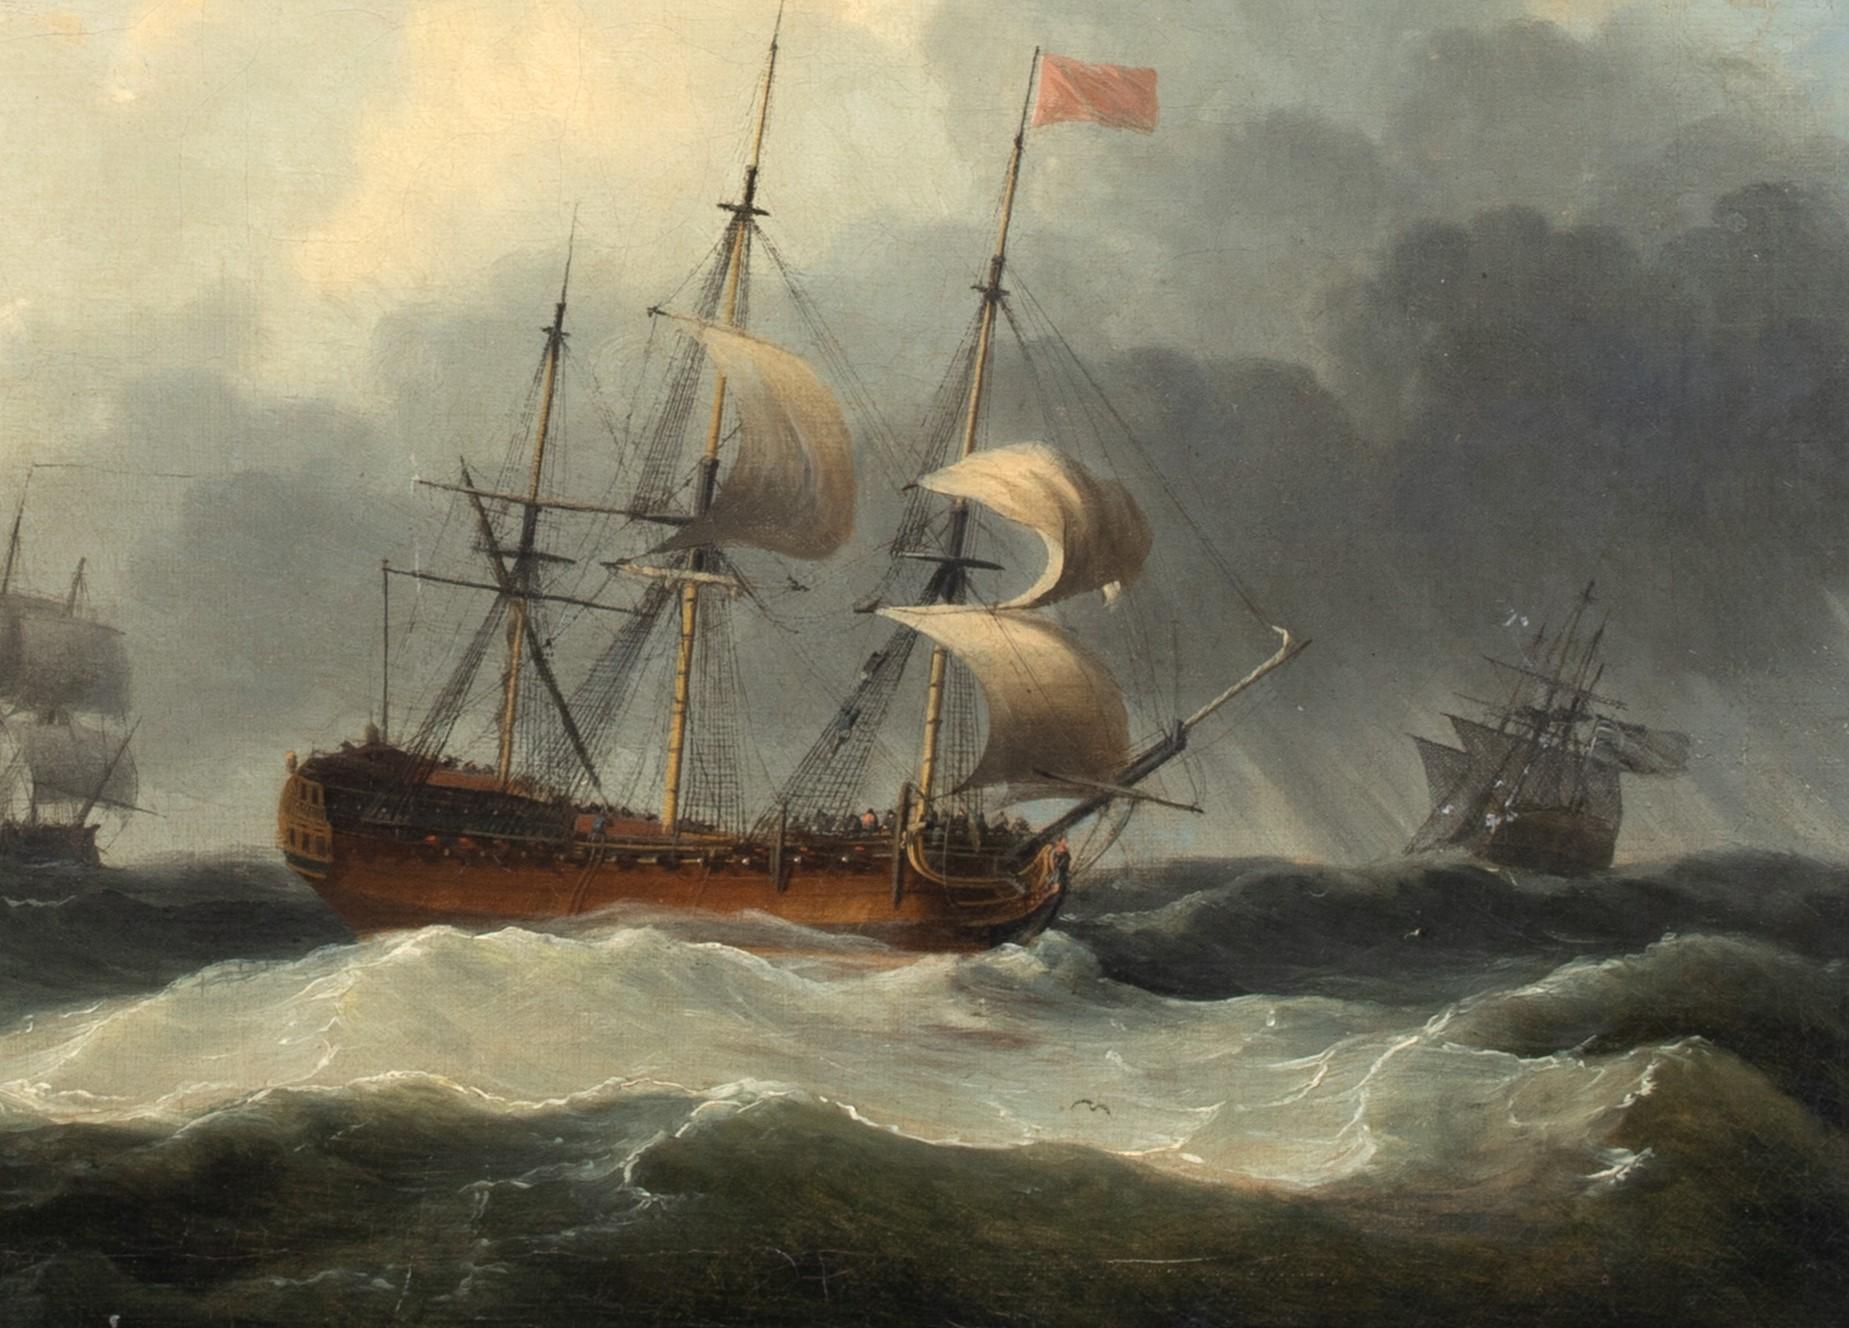 Merchantmen, Men O'war and other vessels in a stormy sea, 18th Century

by JOHN THOMAS SERRES (1759-1825)

Large 18th century British Royal Navy merchant ship, Man O War and other vessels in a swell, oil on canvas by John Thomas Serres. Excellent